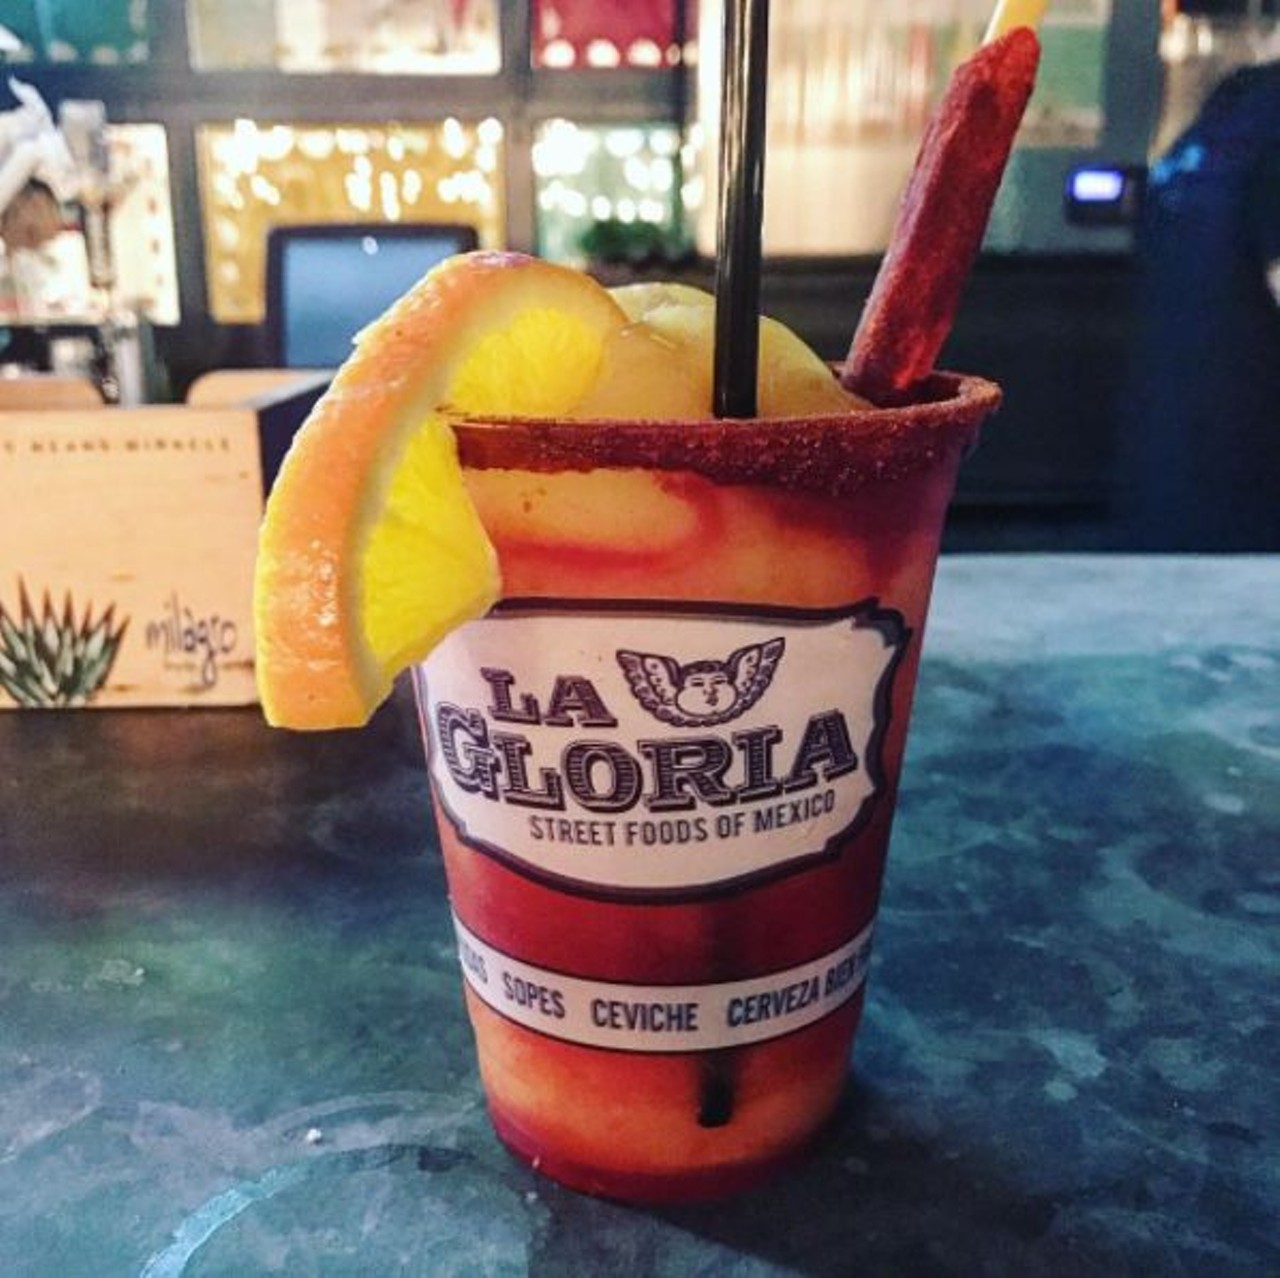 La Gloria
100 E Grayson St., (210) 267-9040
Looking for street-style Mexican food? Look no further.
Photo via Instagram, safoodienetwork